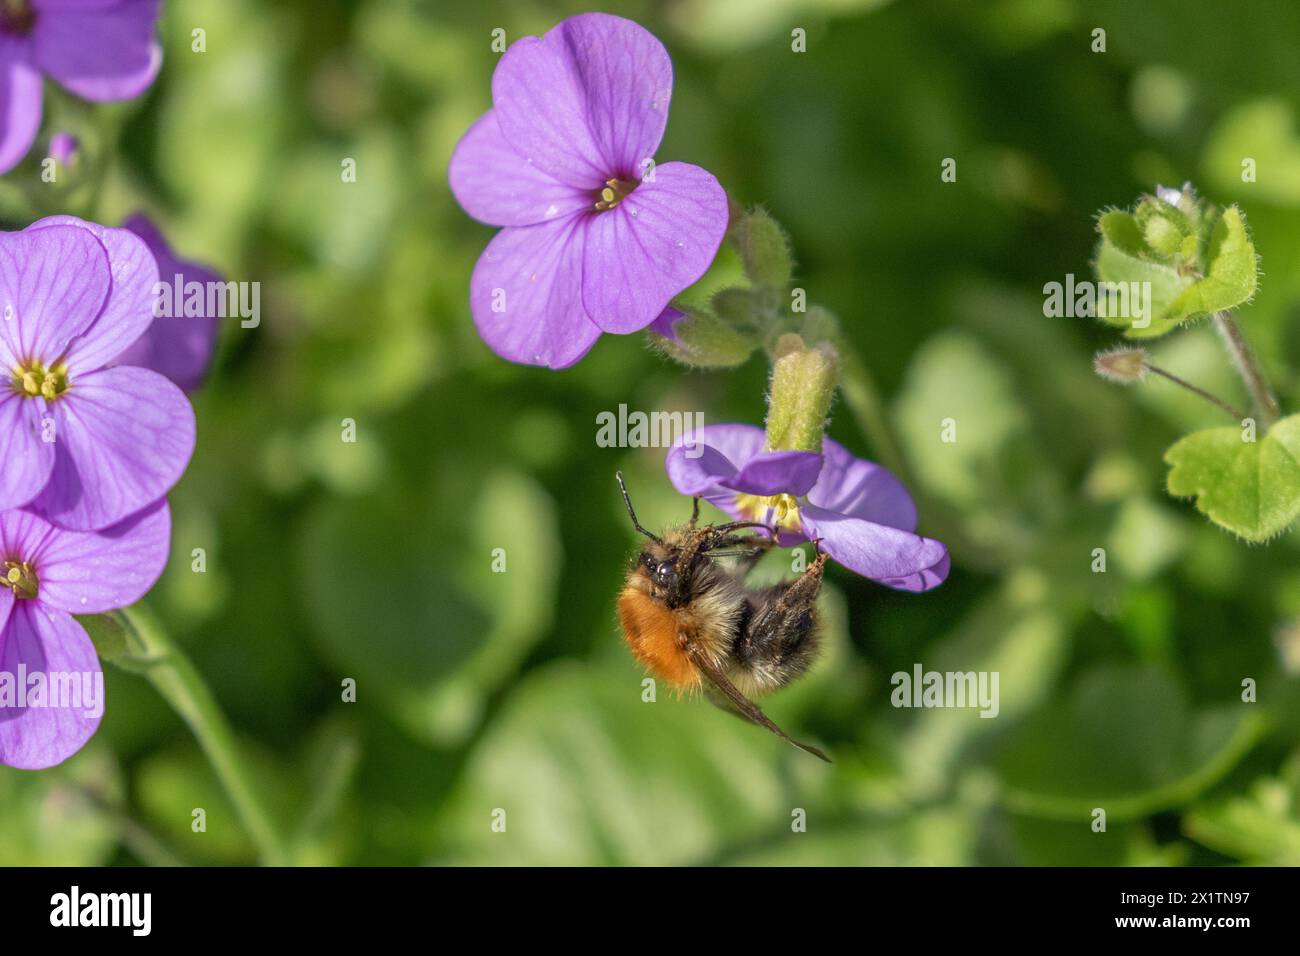 A carder bee (Bombus pascuorum) feeding on purple aubretia flowers in a Yorkshire garden. Stock Photo